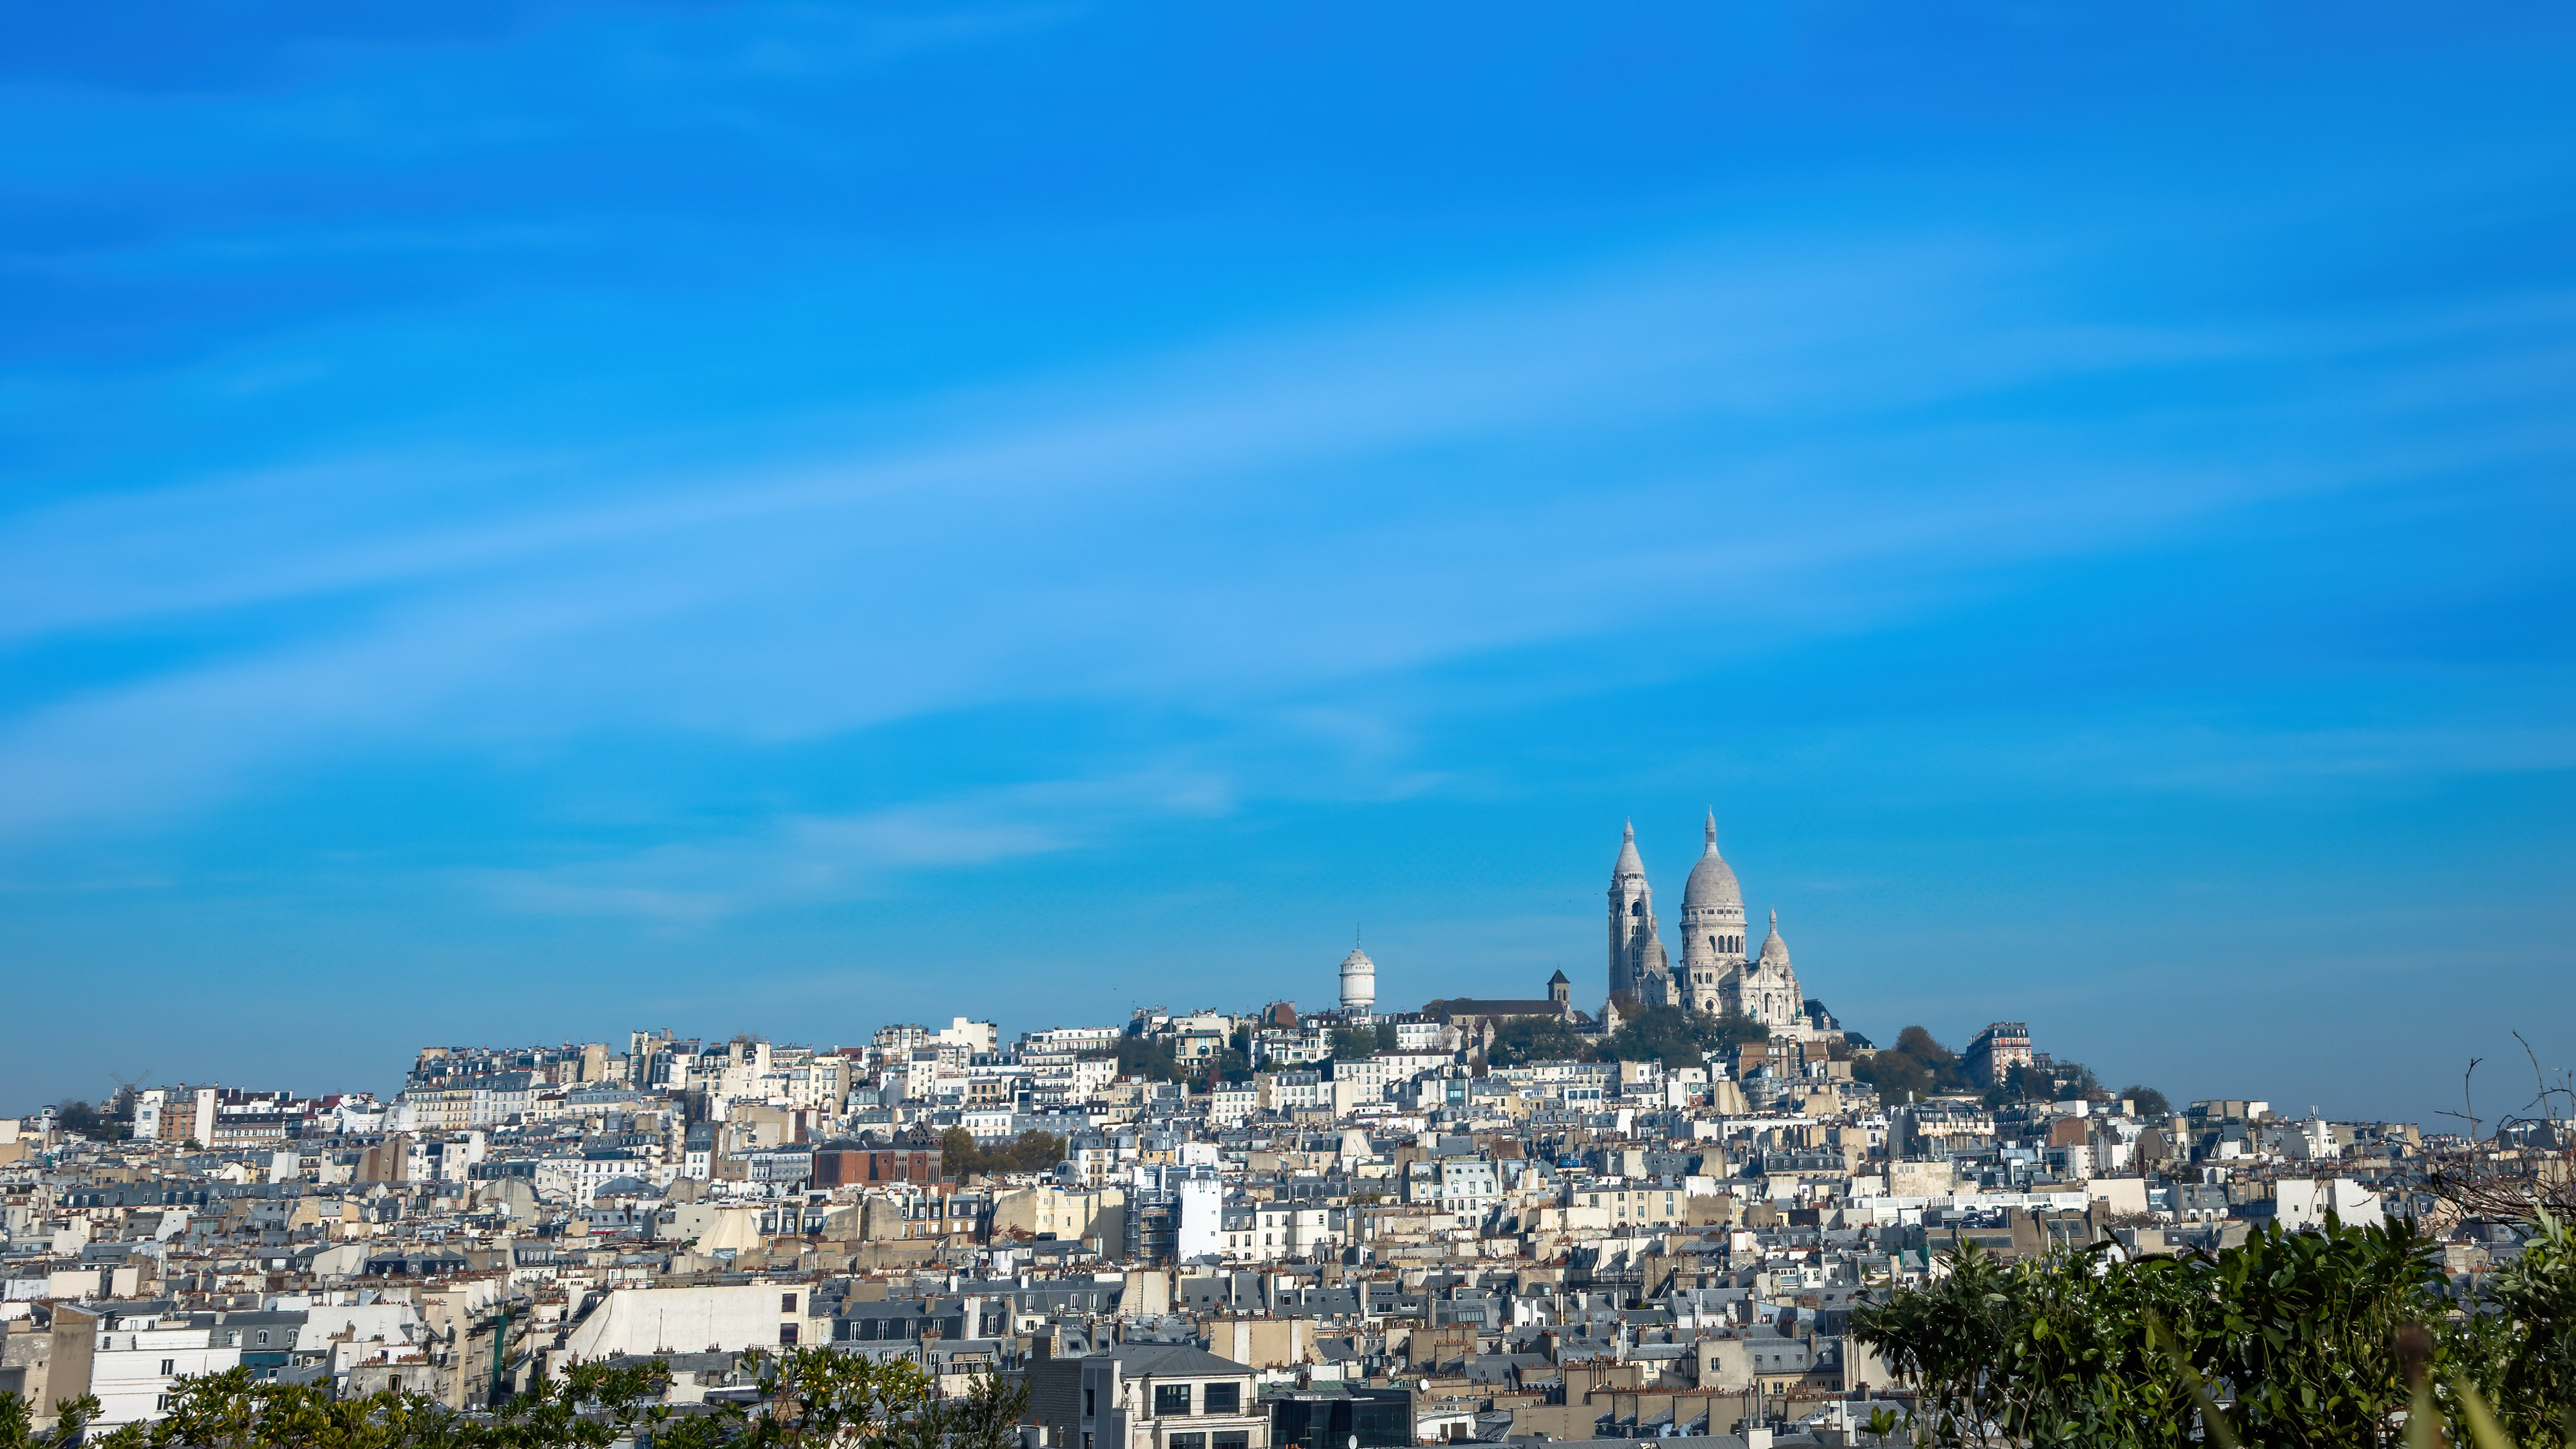 Beautiful cityscape wallpaper of Paris featuring the charming neighborhood of Montmartre and the iconic Sacré-Cœur Basilica.